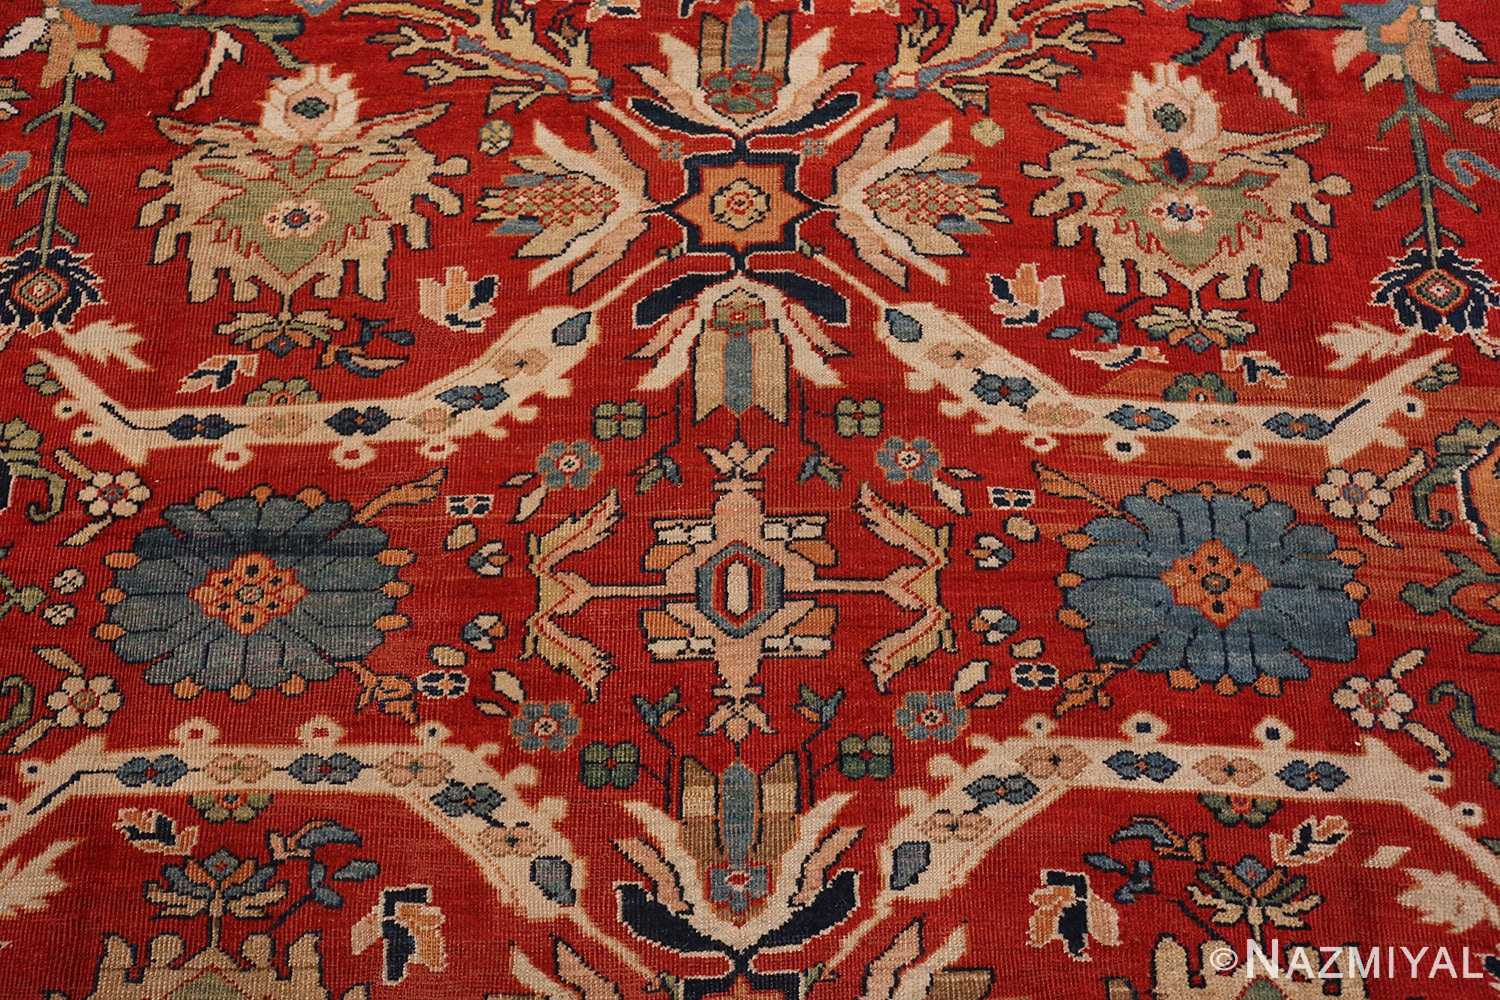 A detailed pattern picture of the antique large scale persian sultanabad carpet #48563 from Nazmiyal Antique Rugs NYC